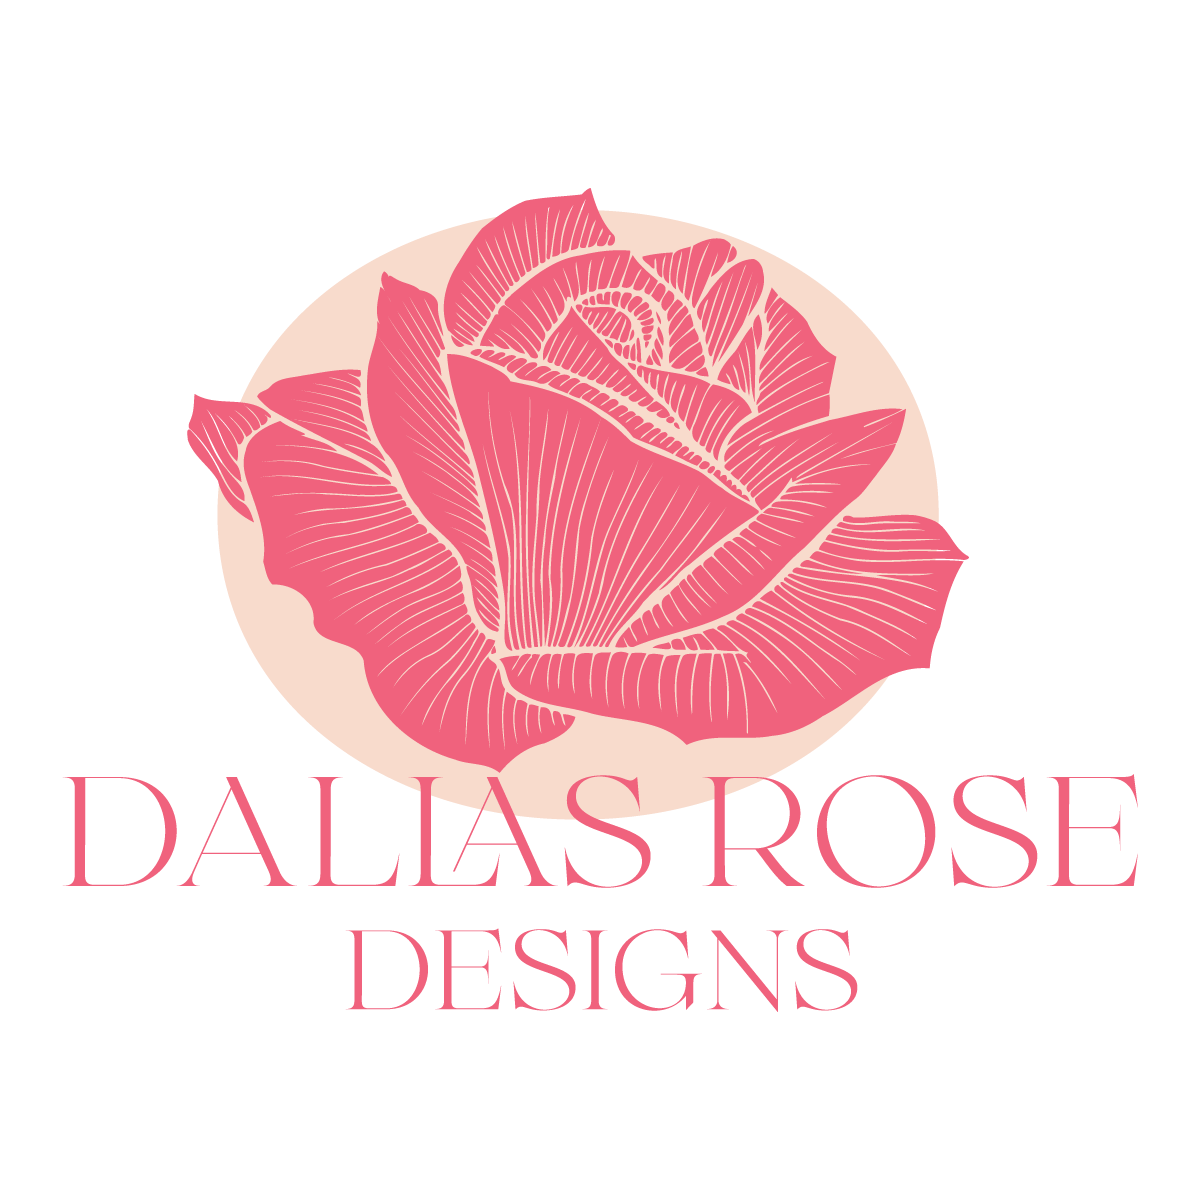 A logo for dallas rose designs with a pink rose